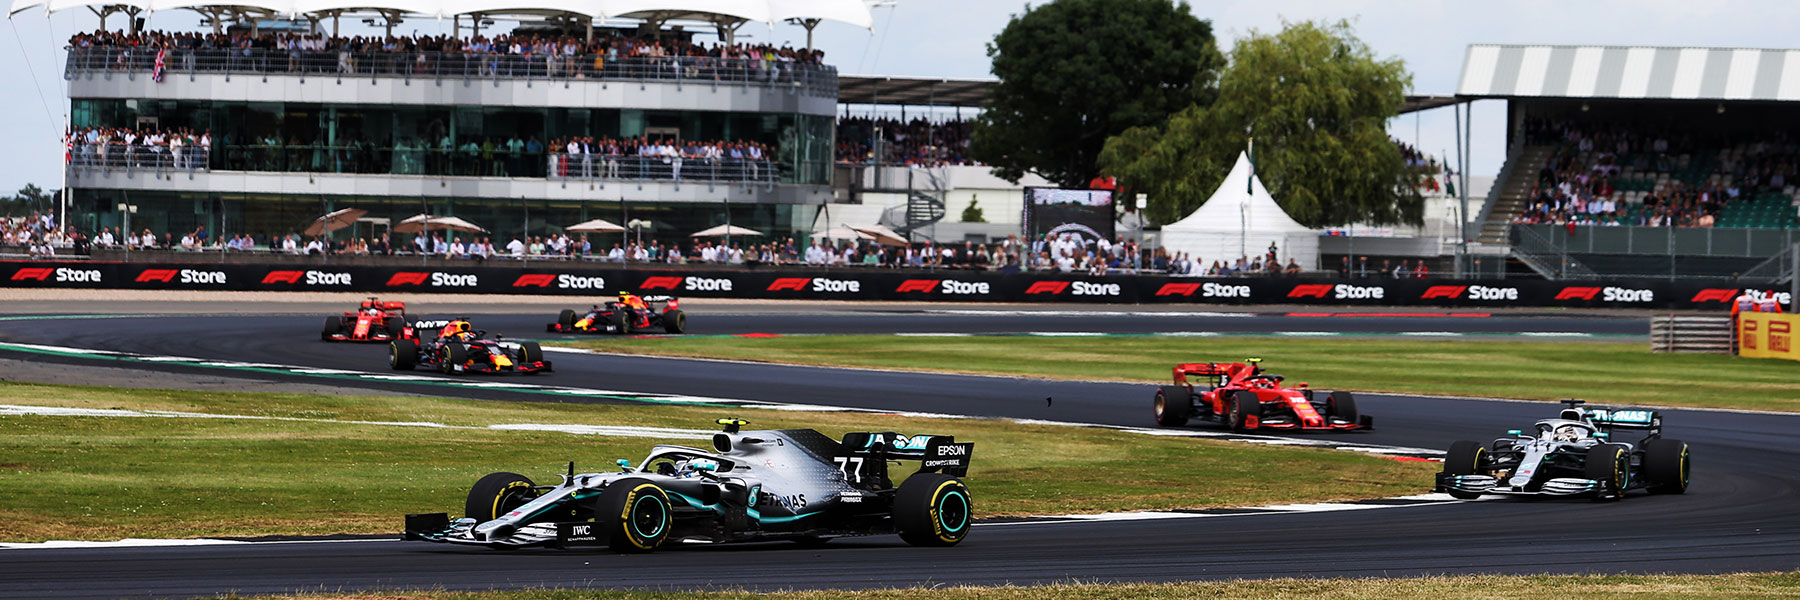 Silverstone F1 Grand Prix July 2023 Full Weekend Hospitality For Two